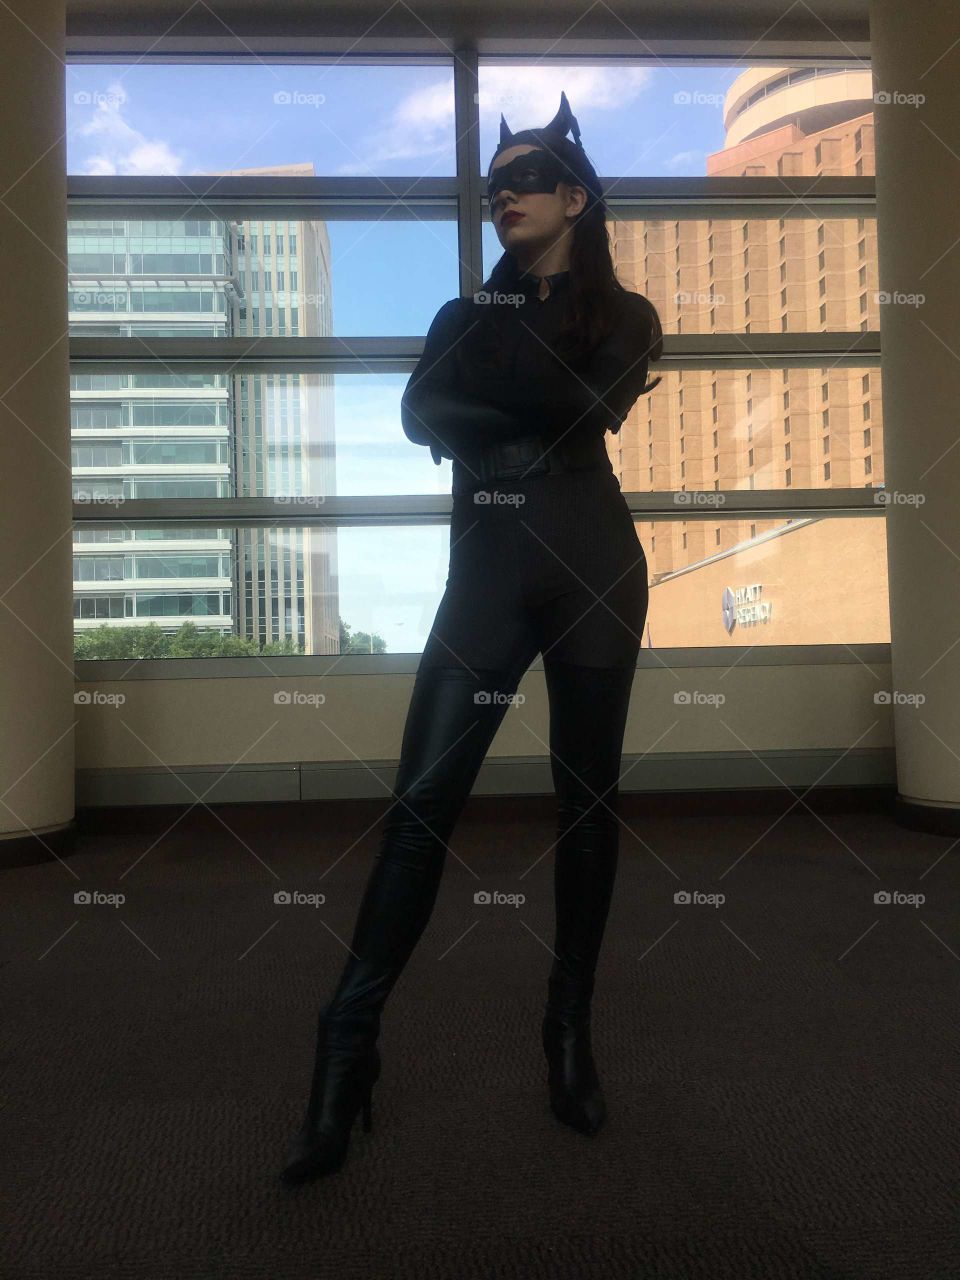 A bold young woman cosplaying as Catwoman